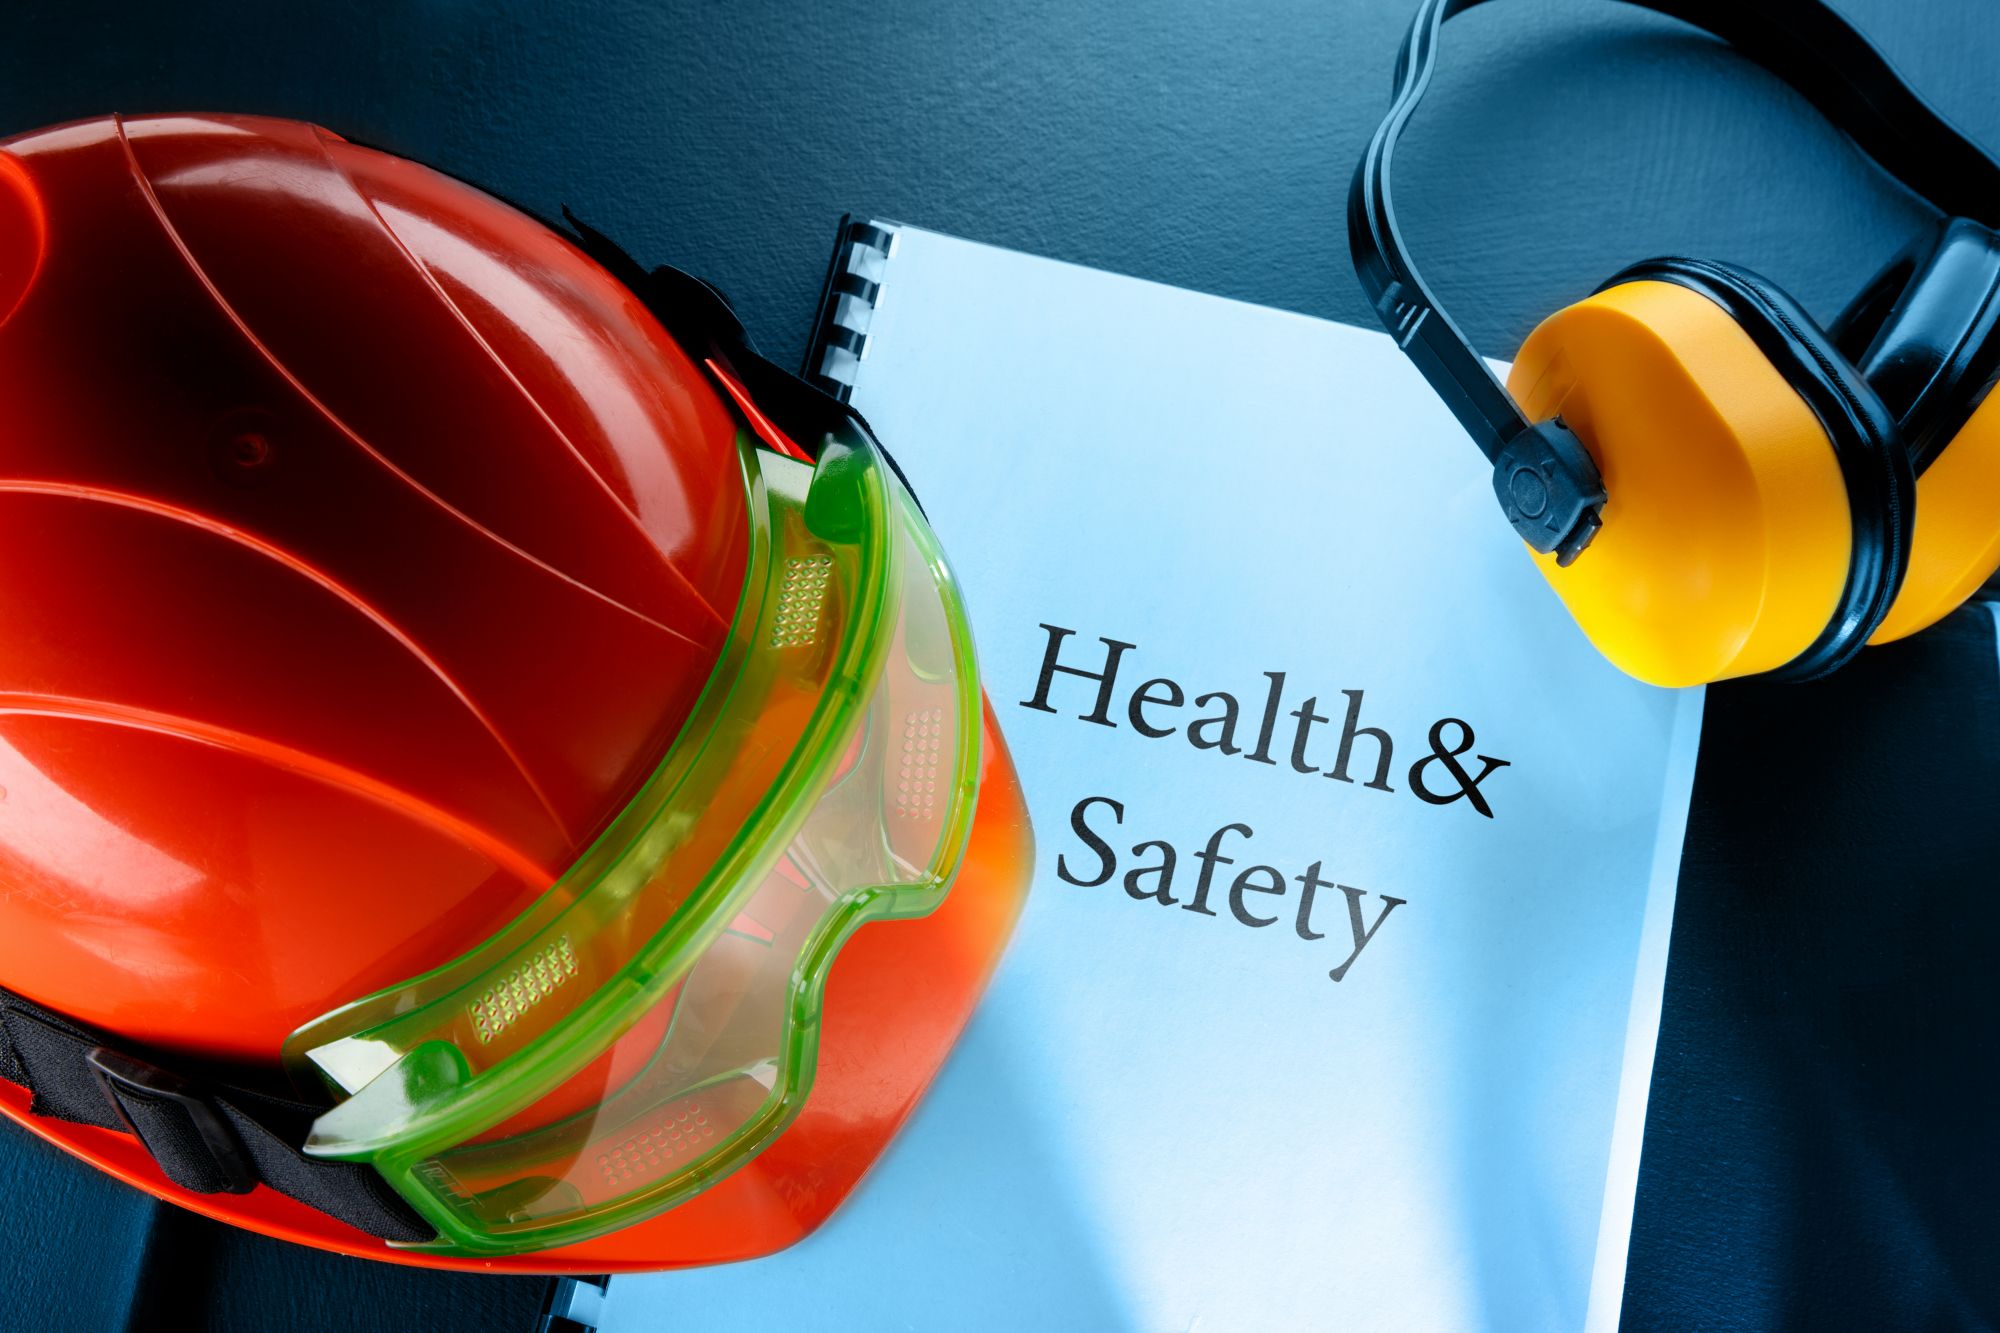 Our Occupational Health &Safety Policy